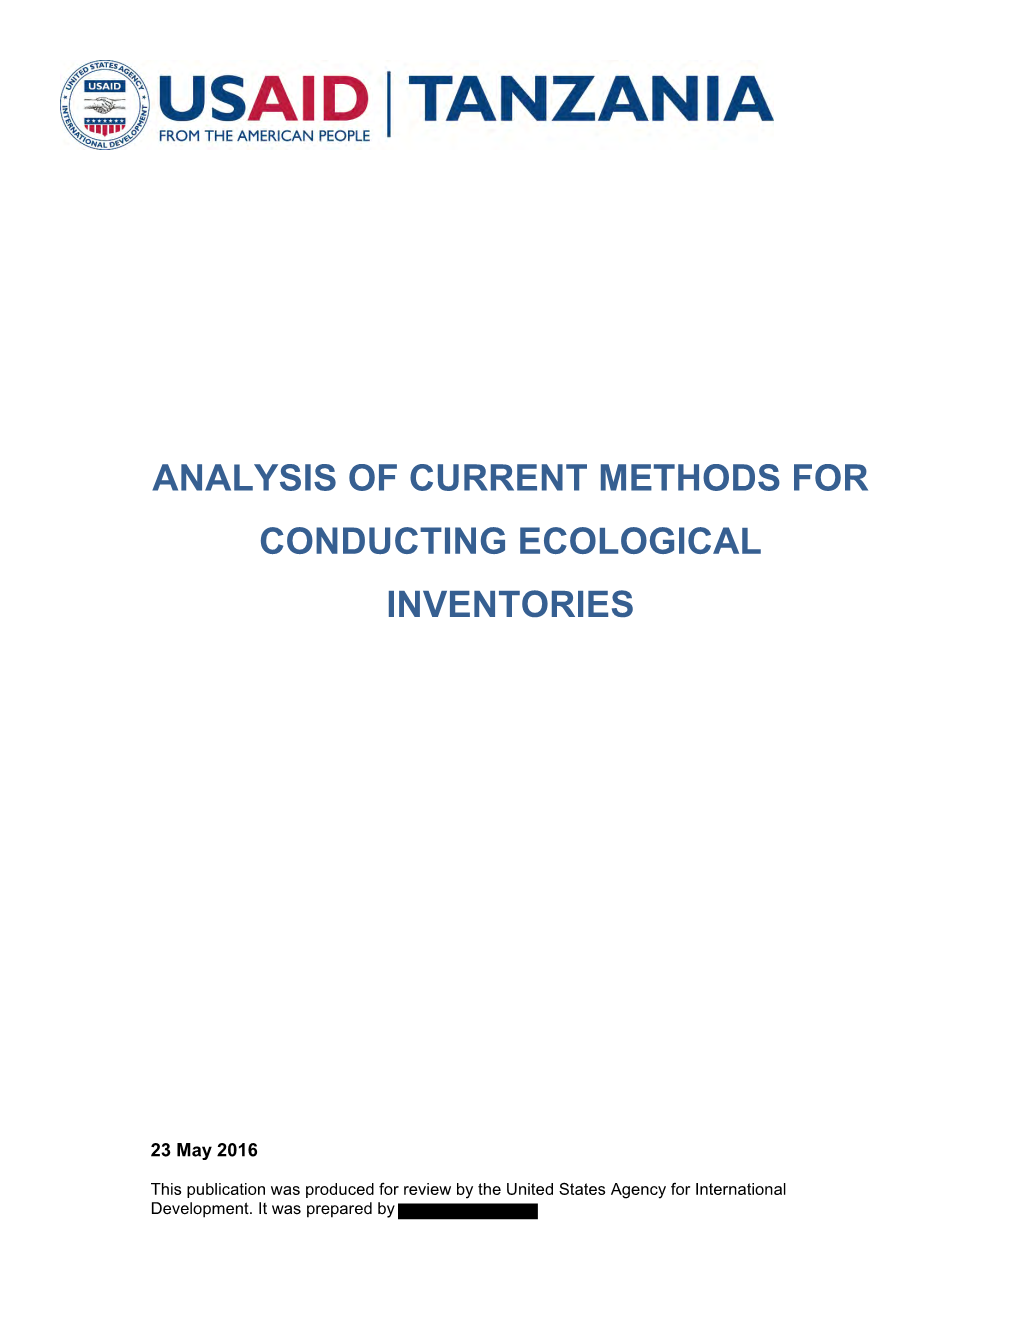 Analysis of Current Methods for Conducting Ecological Inventories